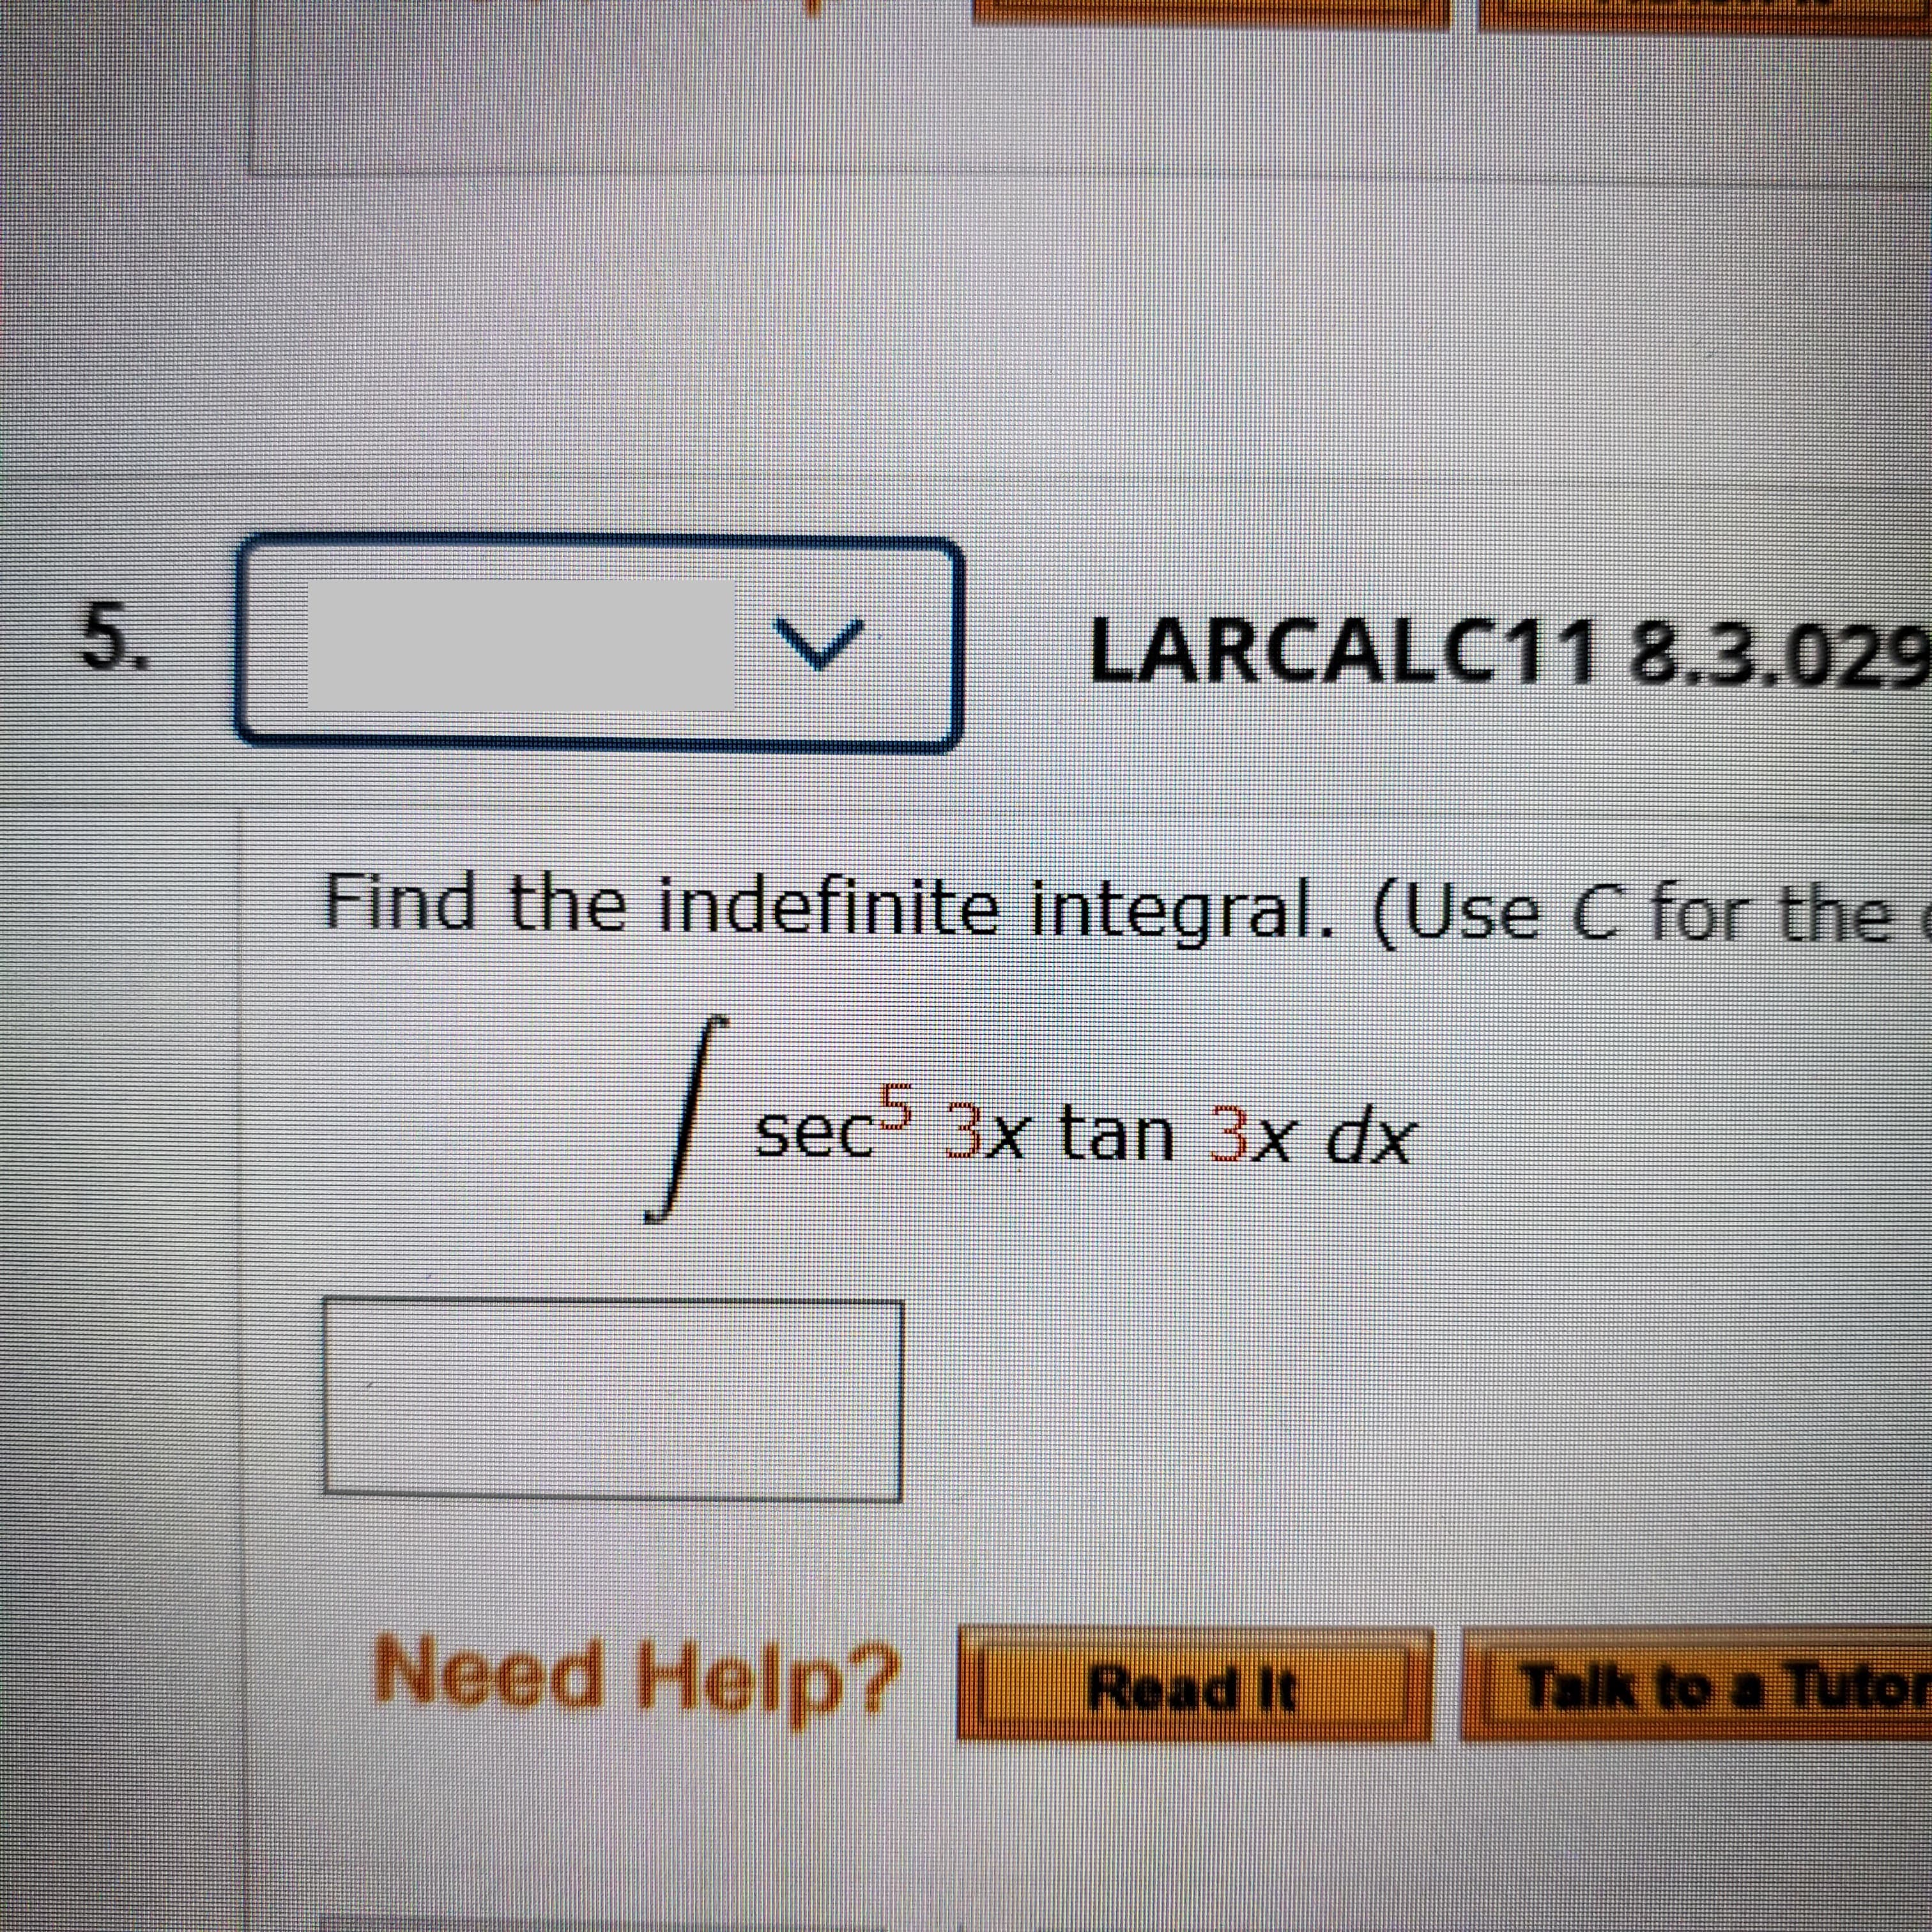 5.
LARCALC118.3.029
Find the indefinite integral. (Use C for the
sec
3x tan 3x dx
Need Help? Read It
Talk to a Tutor
